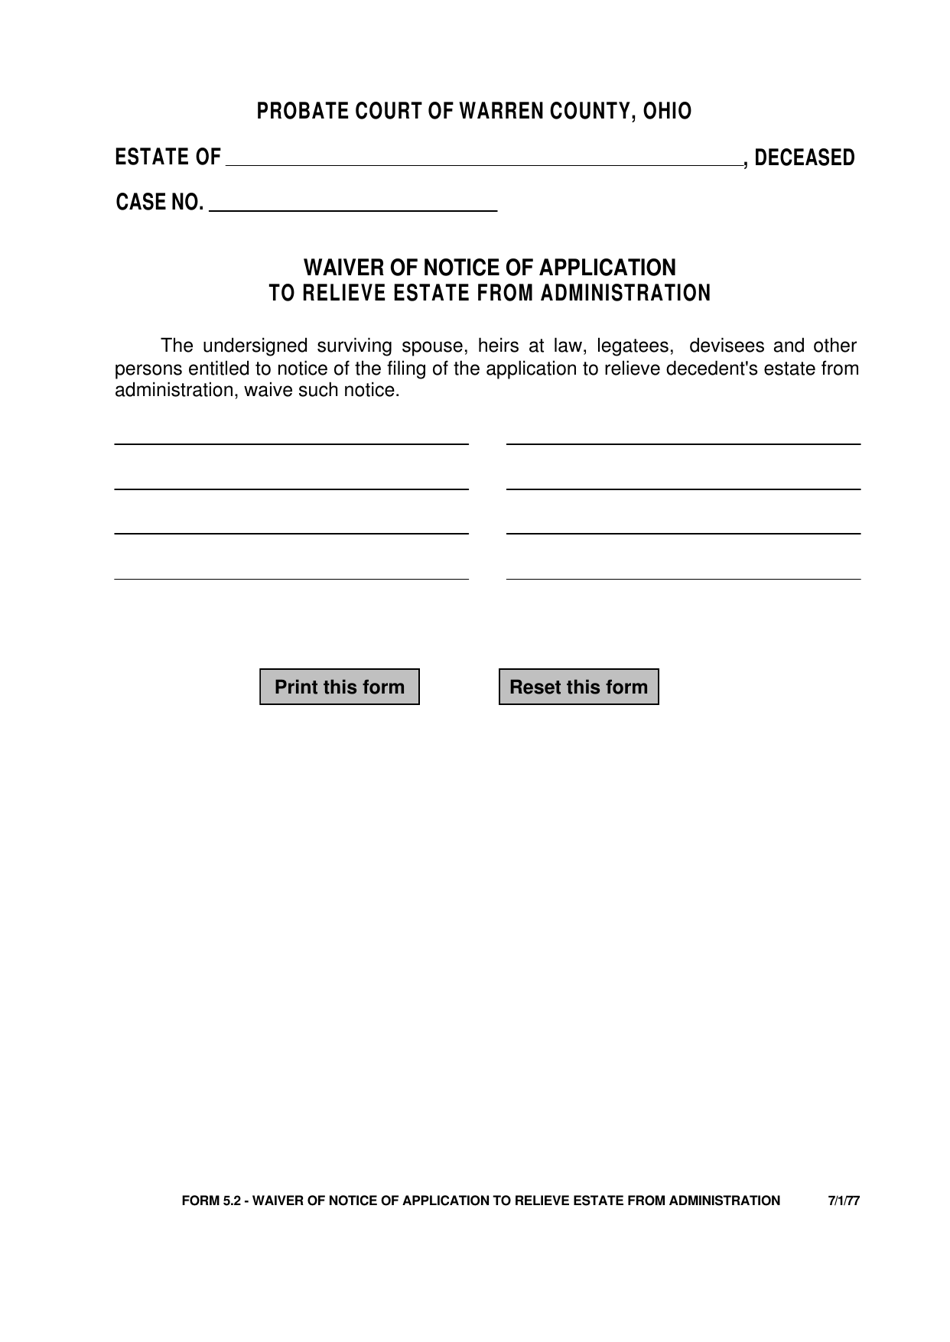 Form 5.2 Waiver of Notice of Application to Relieve Estate From Administration - Warren County, Ohio, Page 1